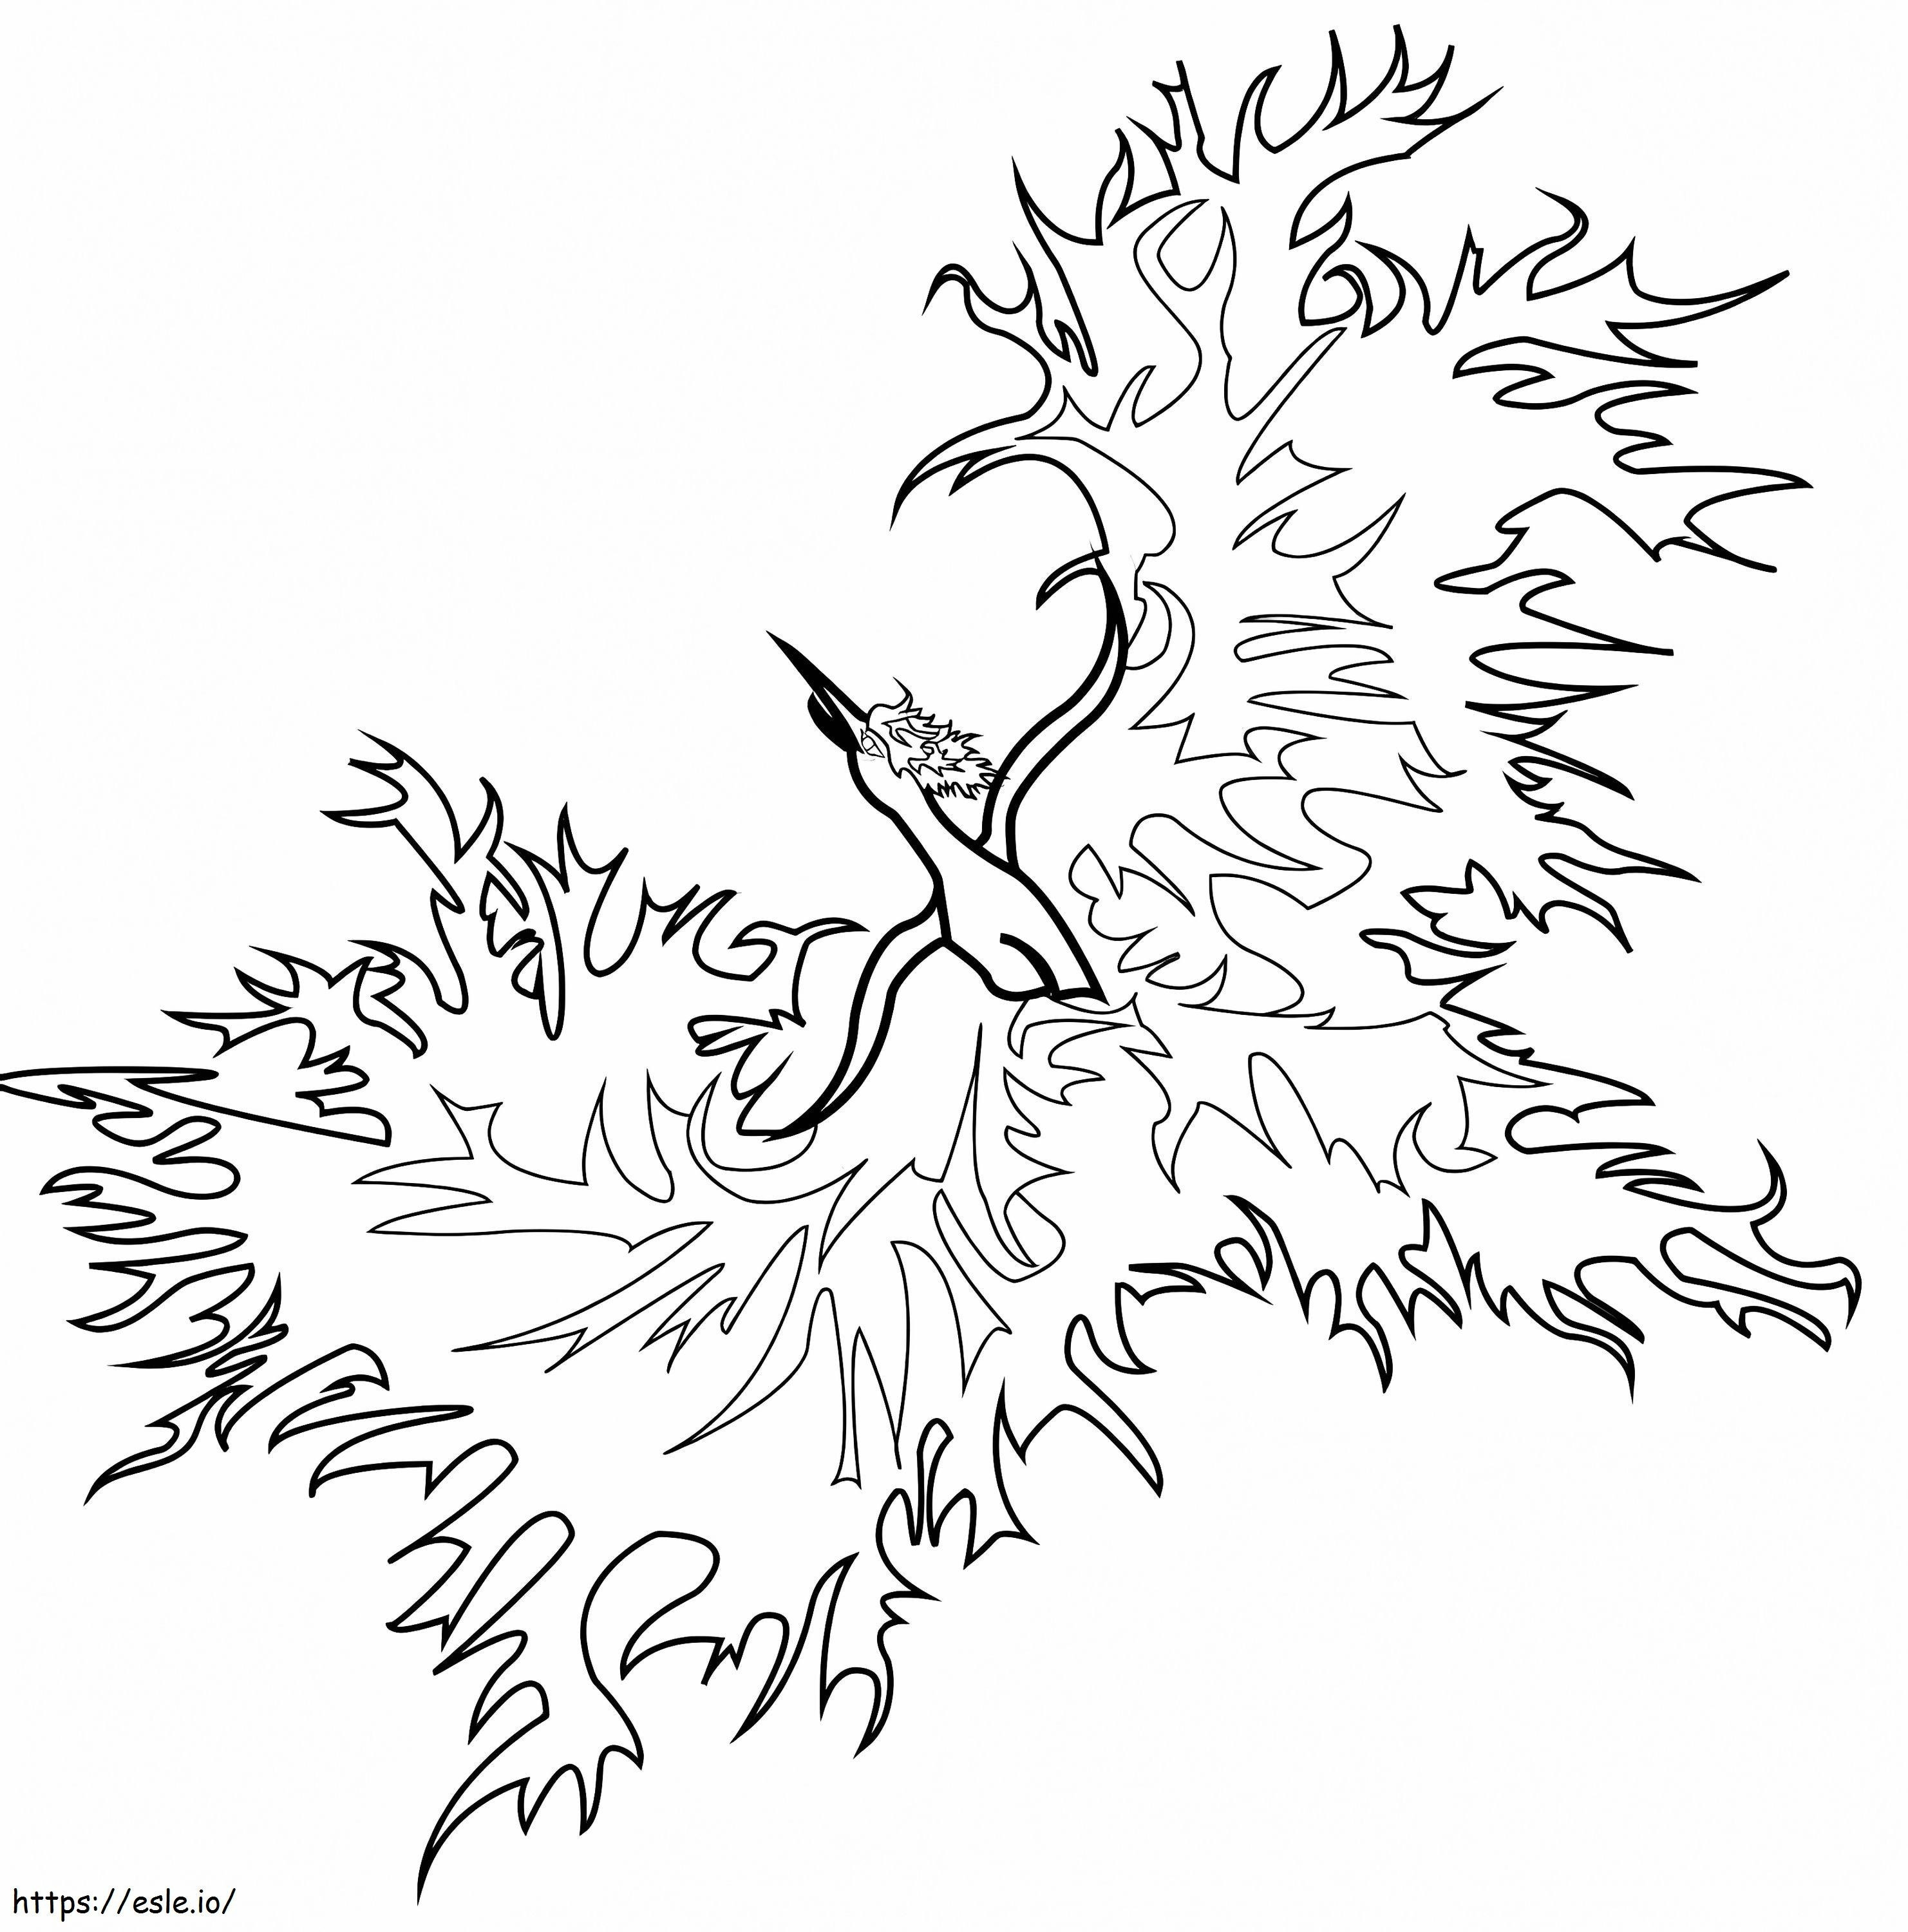 Fire Phoenix coloring page